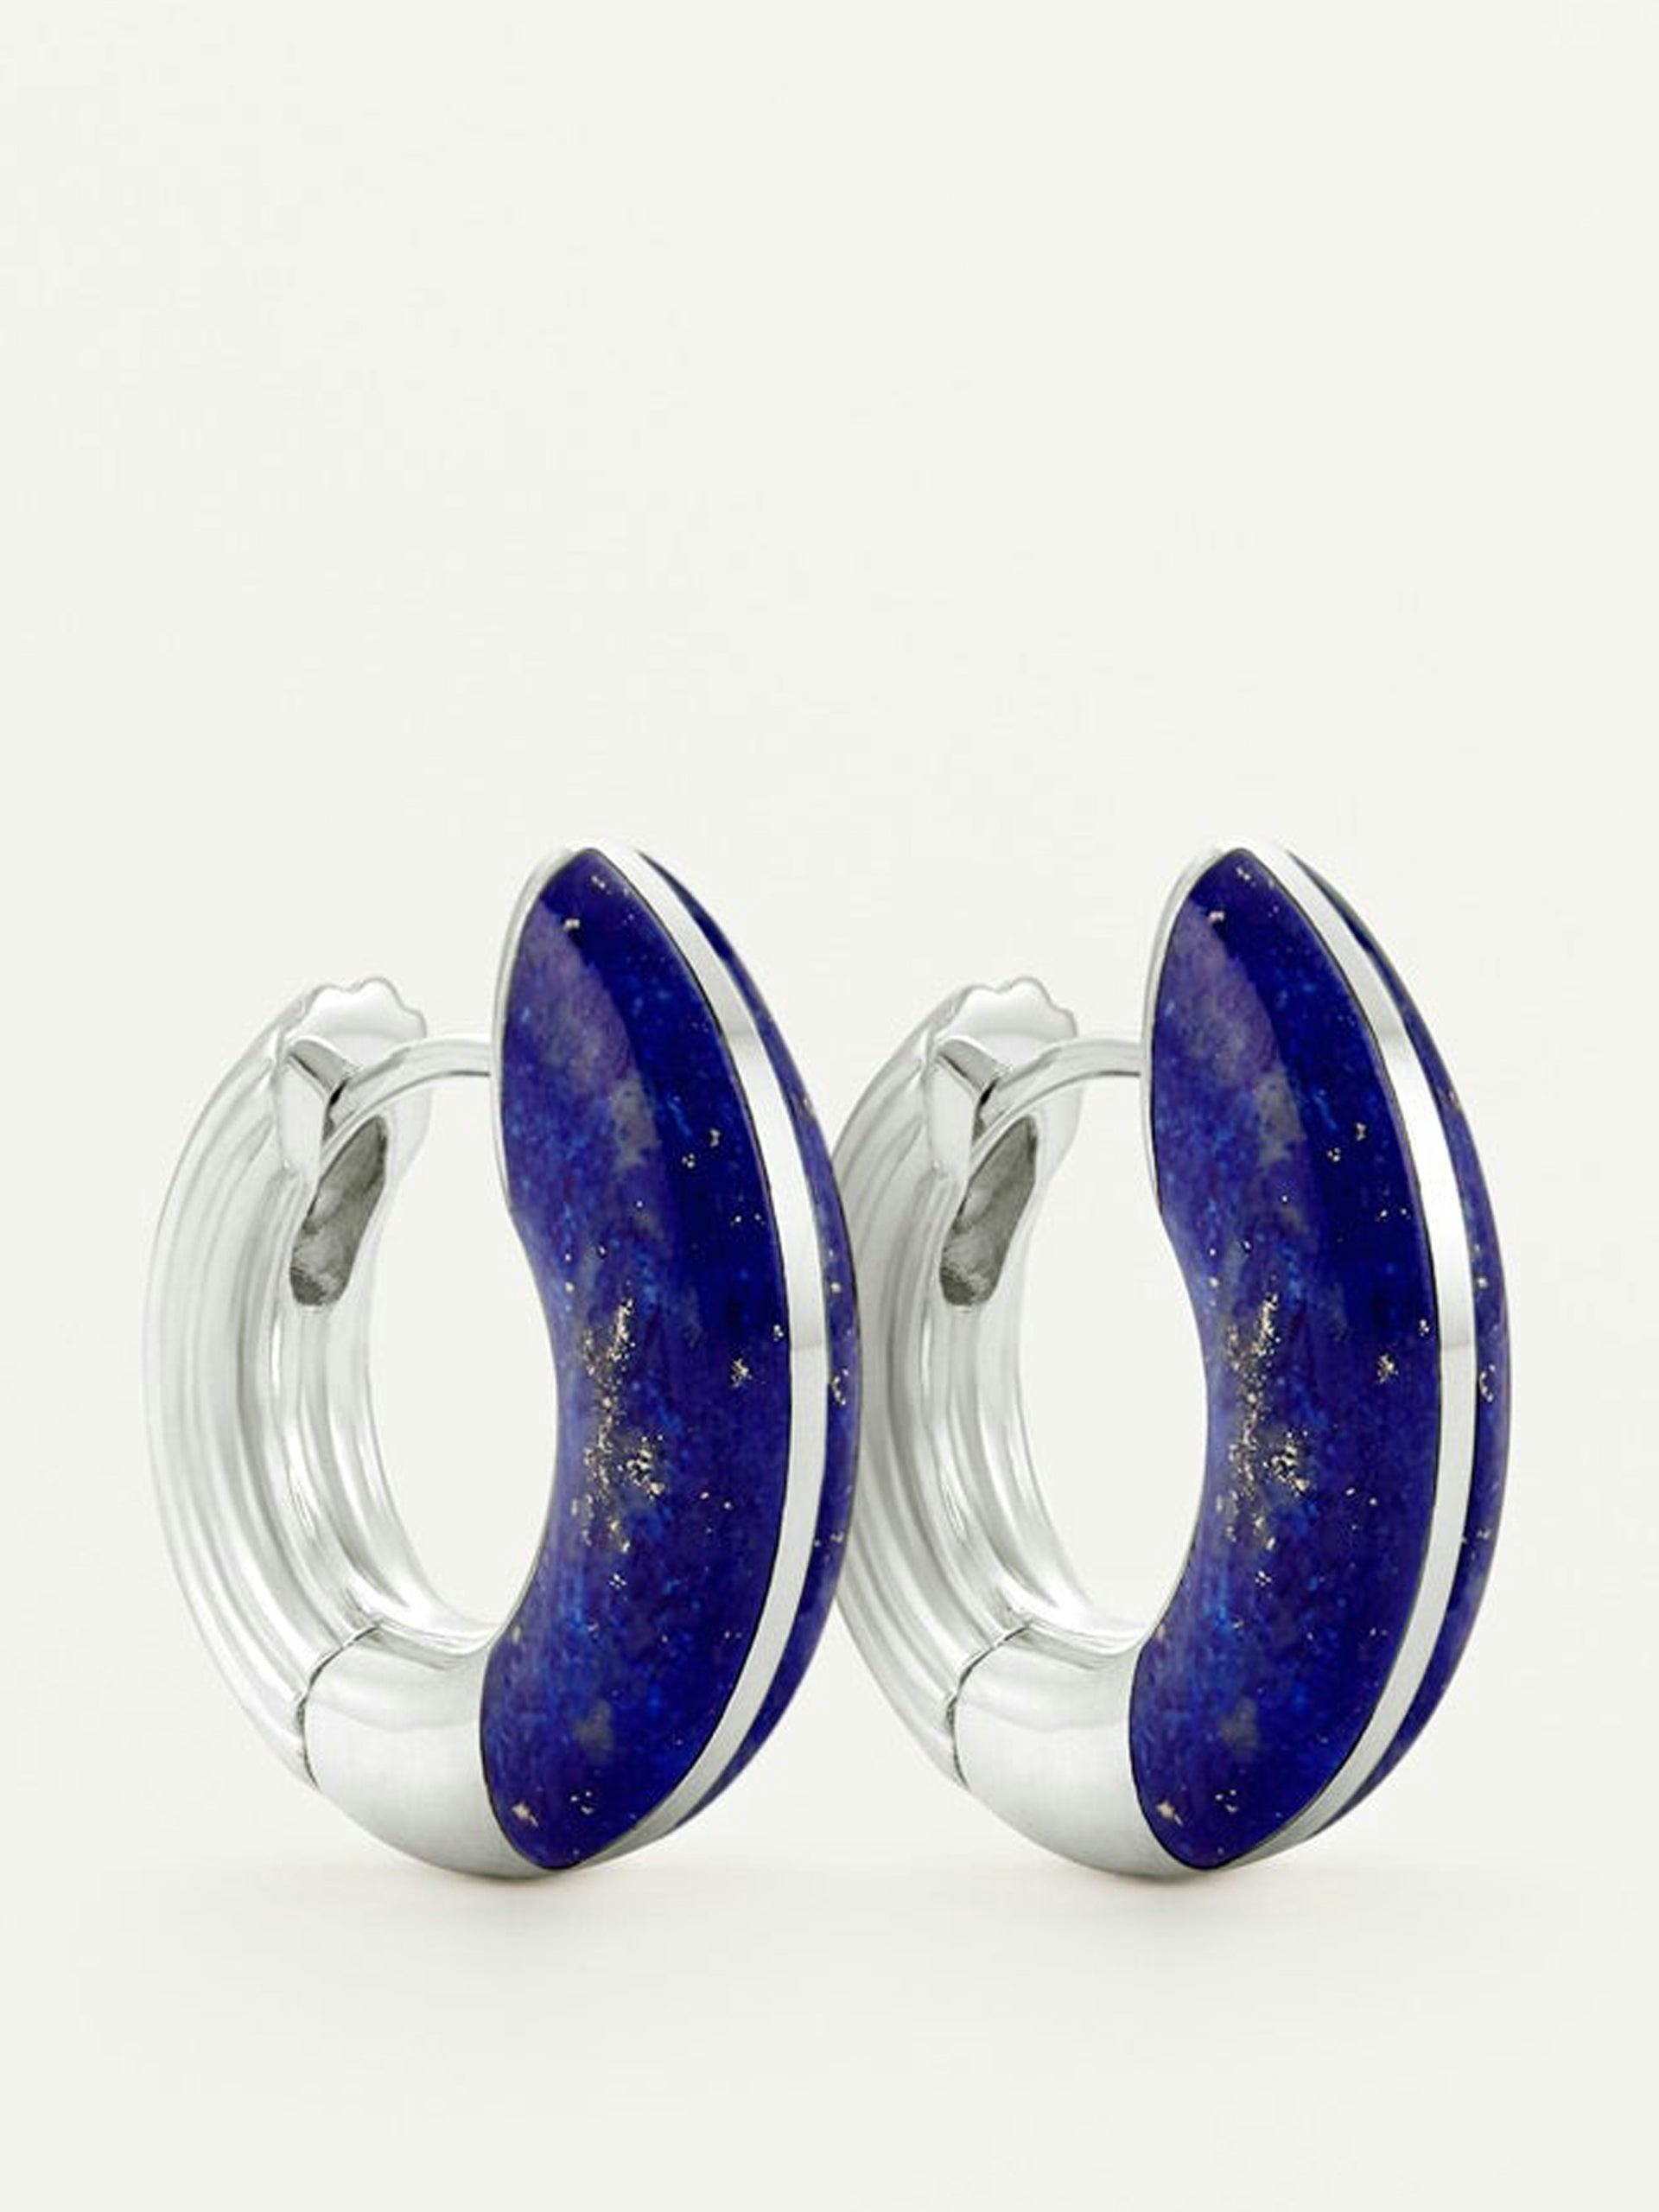 Locus Solus lapis and silver hoops